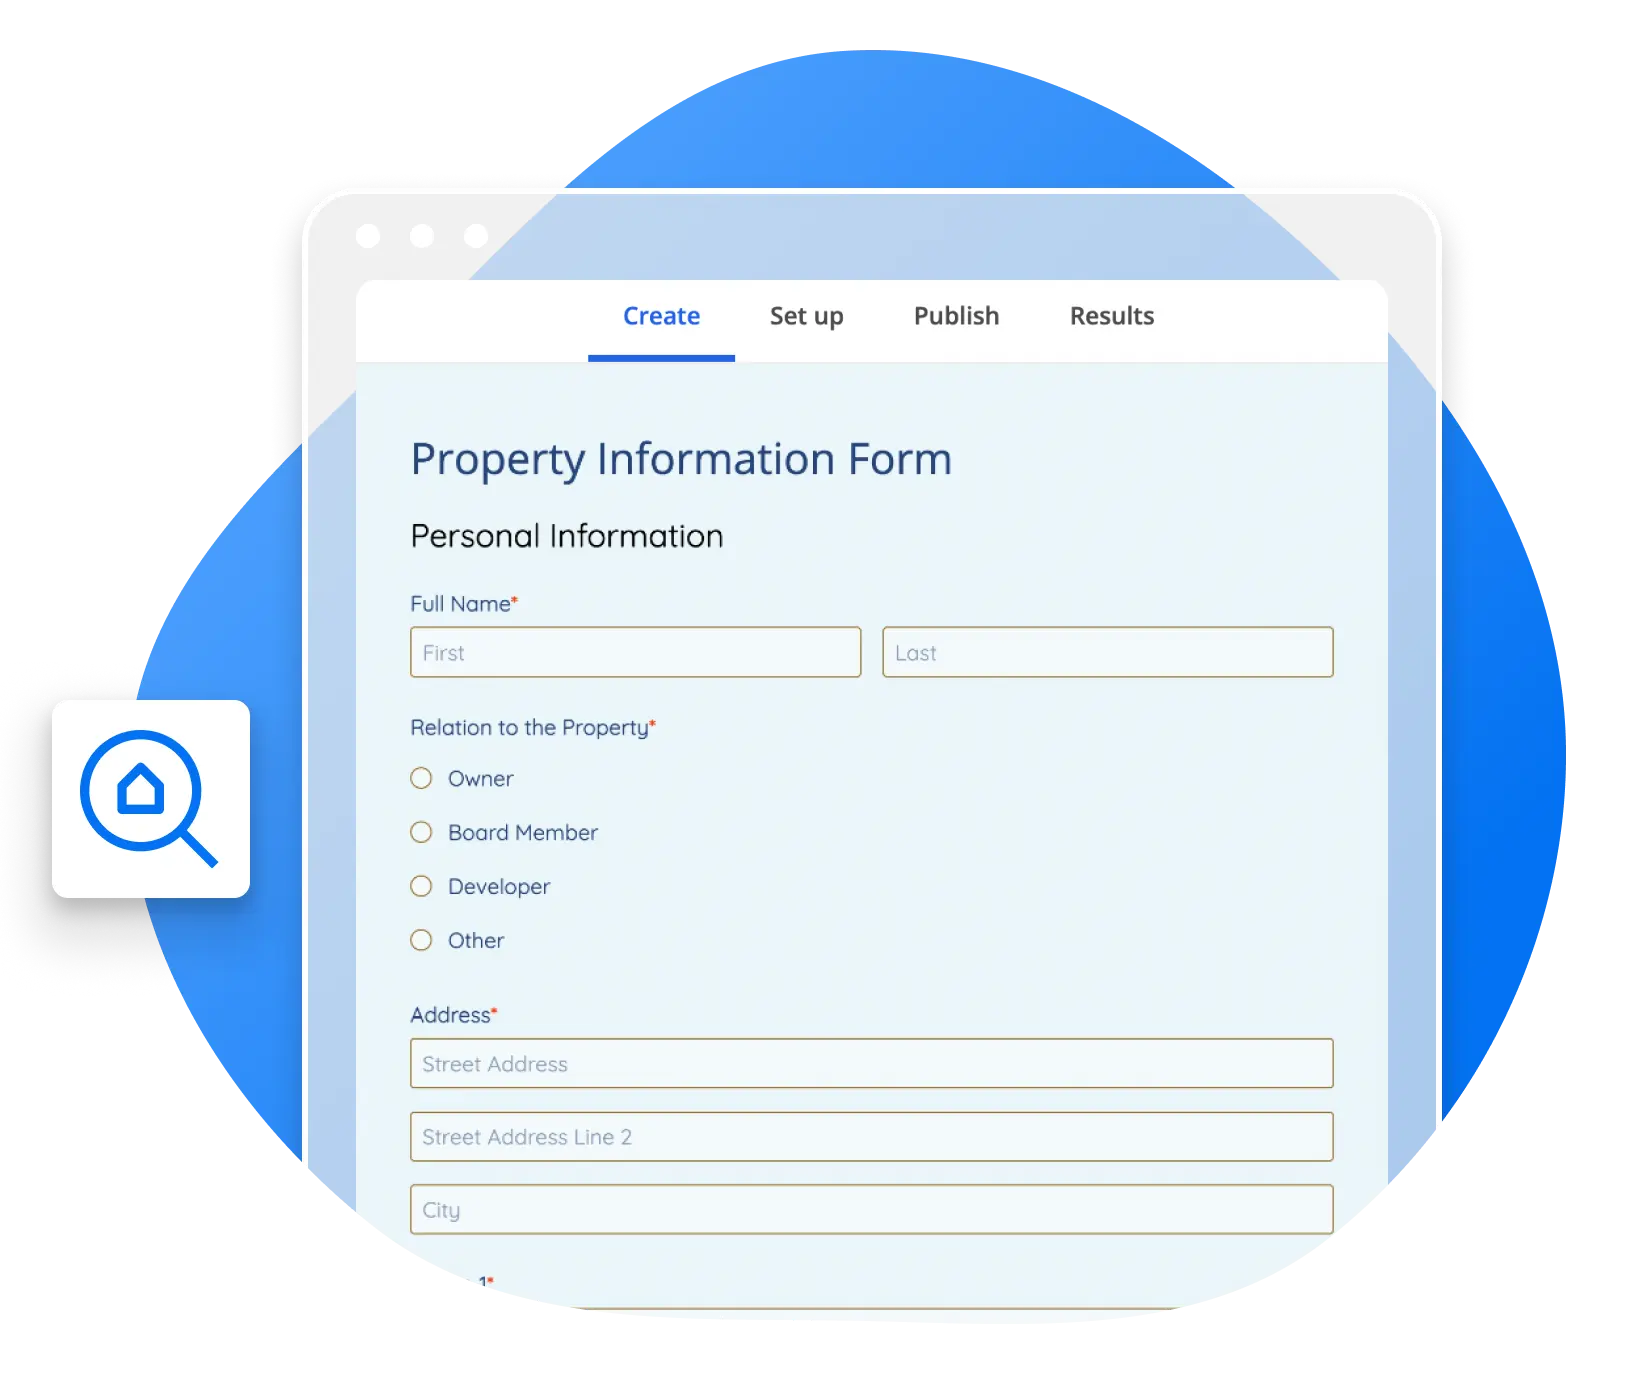 Image showing a Property Information Form Template